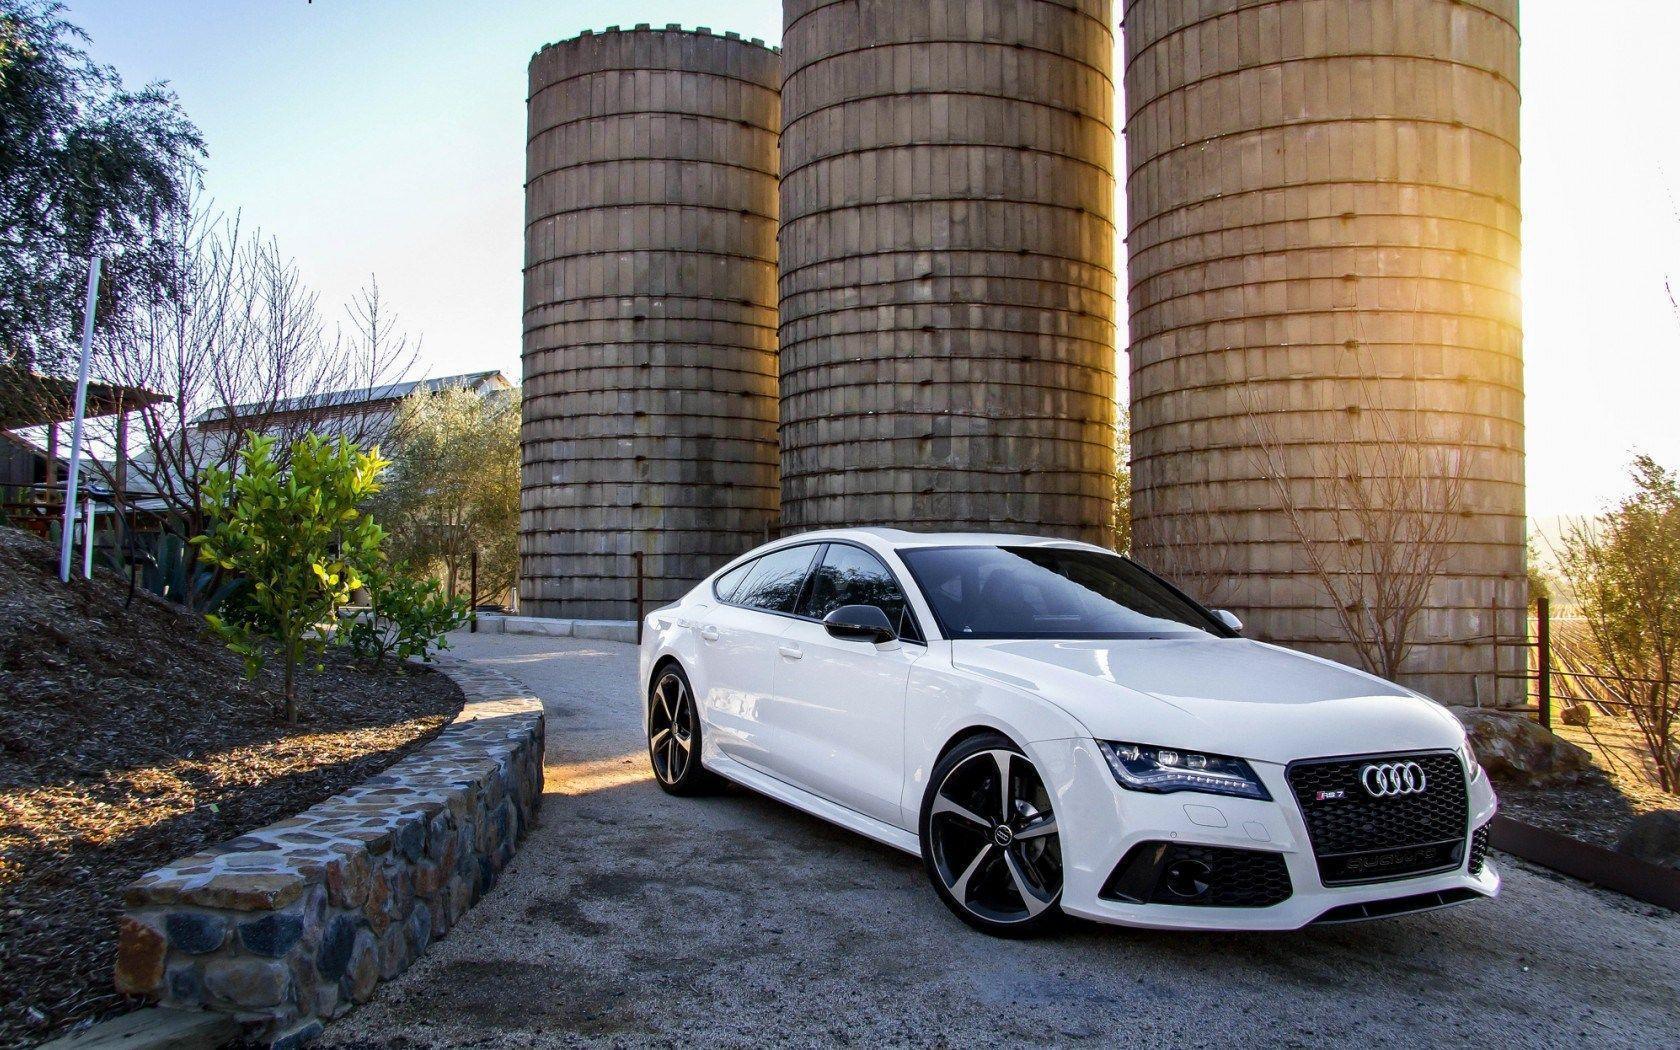 Awesome Audi RS7 Wallpaper 36961 1680x1050 px